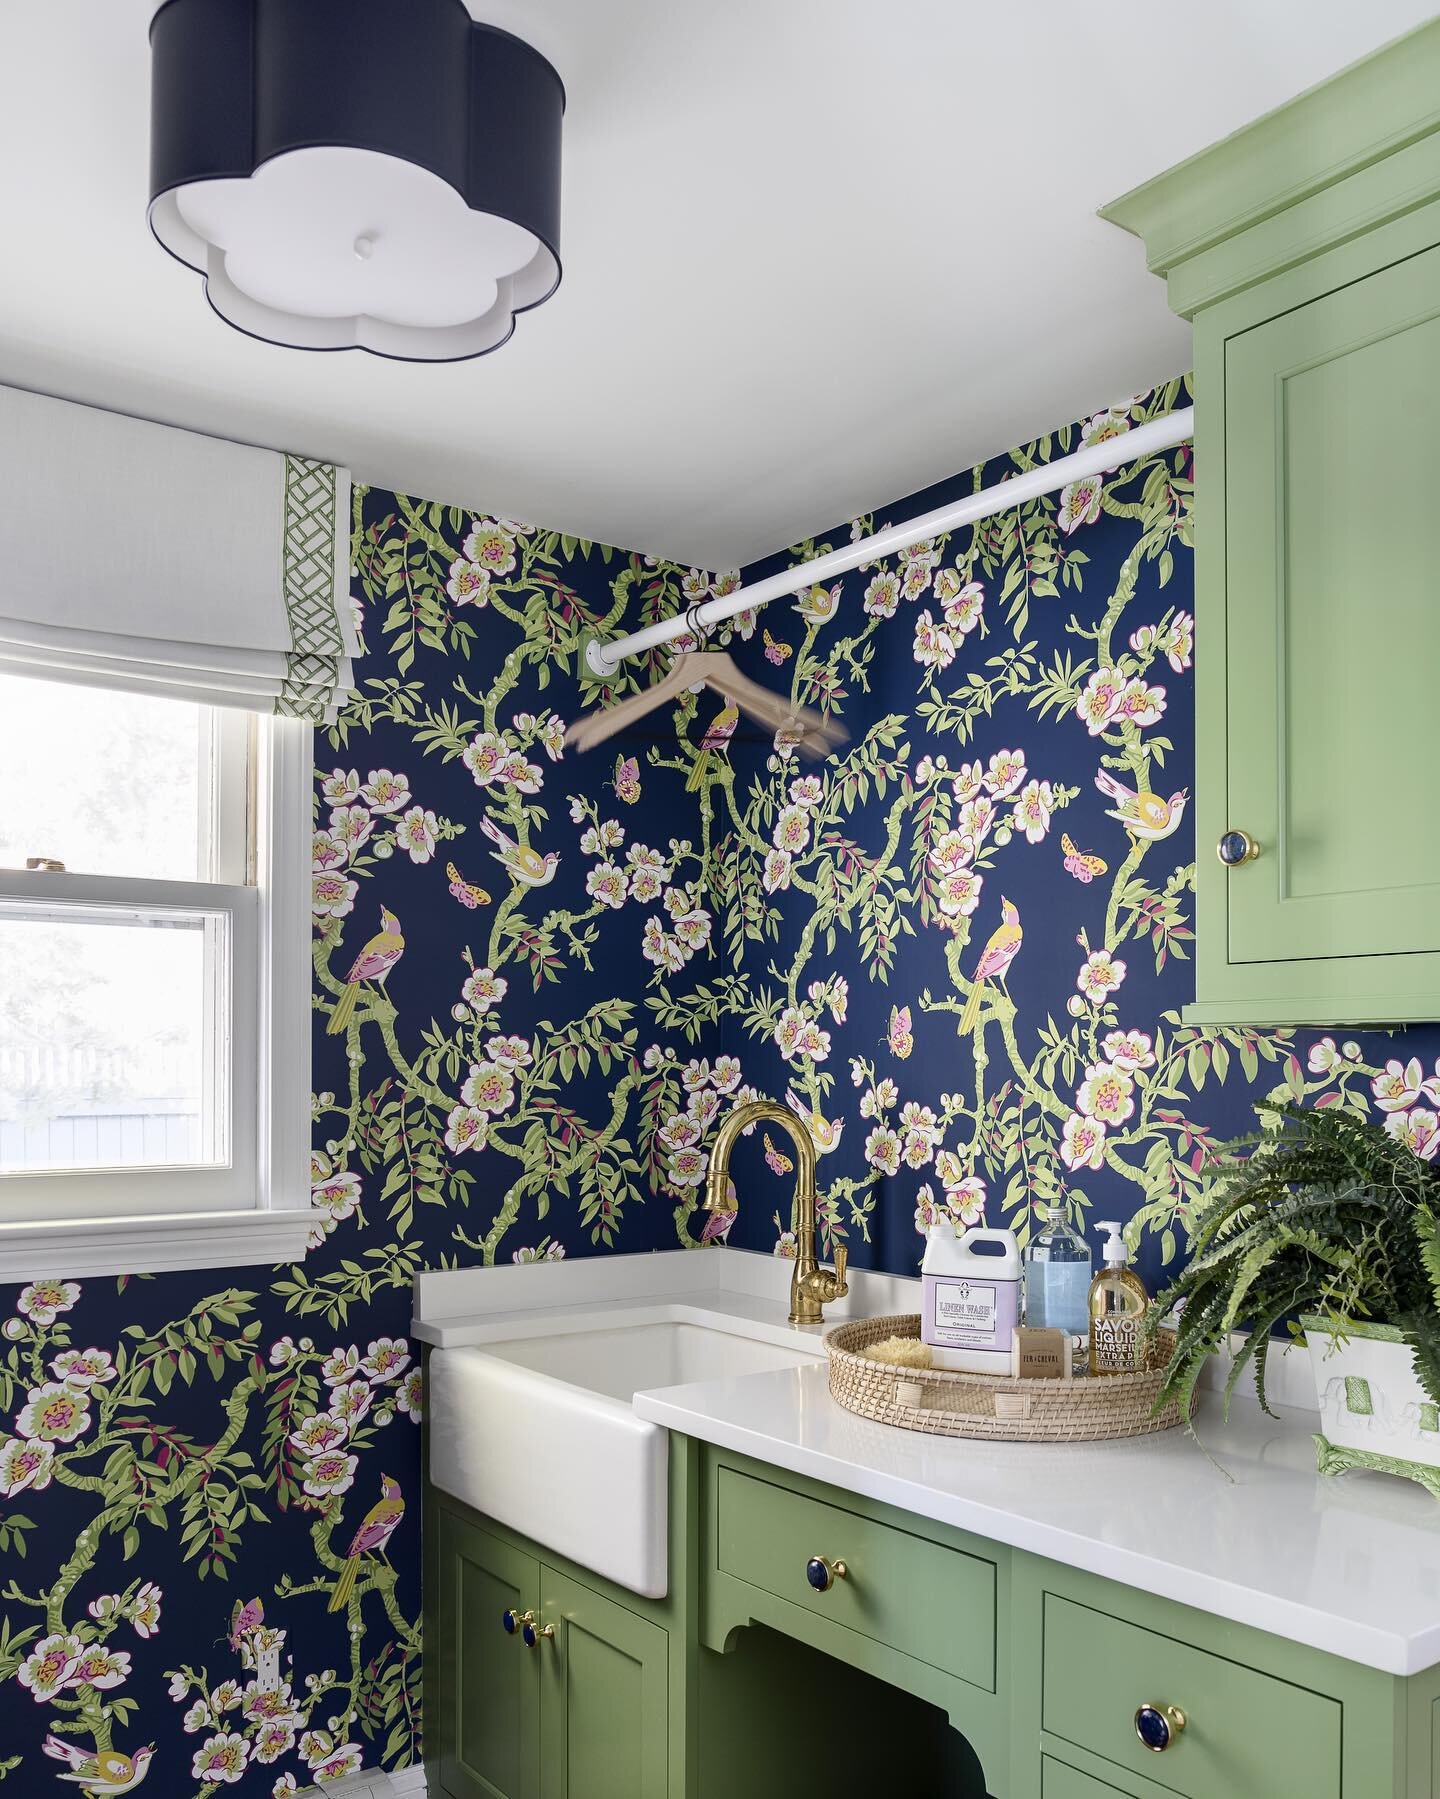 Now THIS is a laundry room I wouldn&rsquo;t mind spending time in&hellip;💚💙 &hellip;&hellip;&hellip;&hellip;&hellip;&hellip;&hellip;&hellip;&hellip;&hellip;&hellip;&hellip;..&hellip;&hellip;&hellip;&hellip;&hellip;&hellip;&hellip;&hellip;&hellip;&h